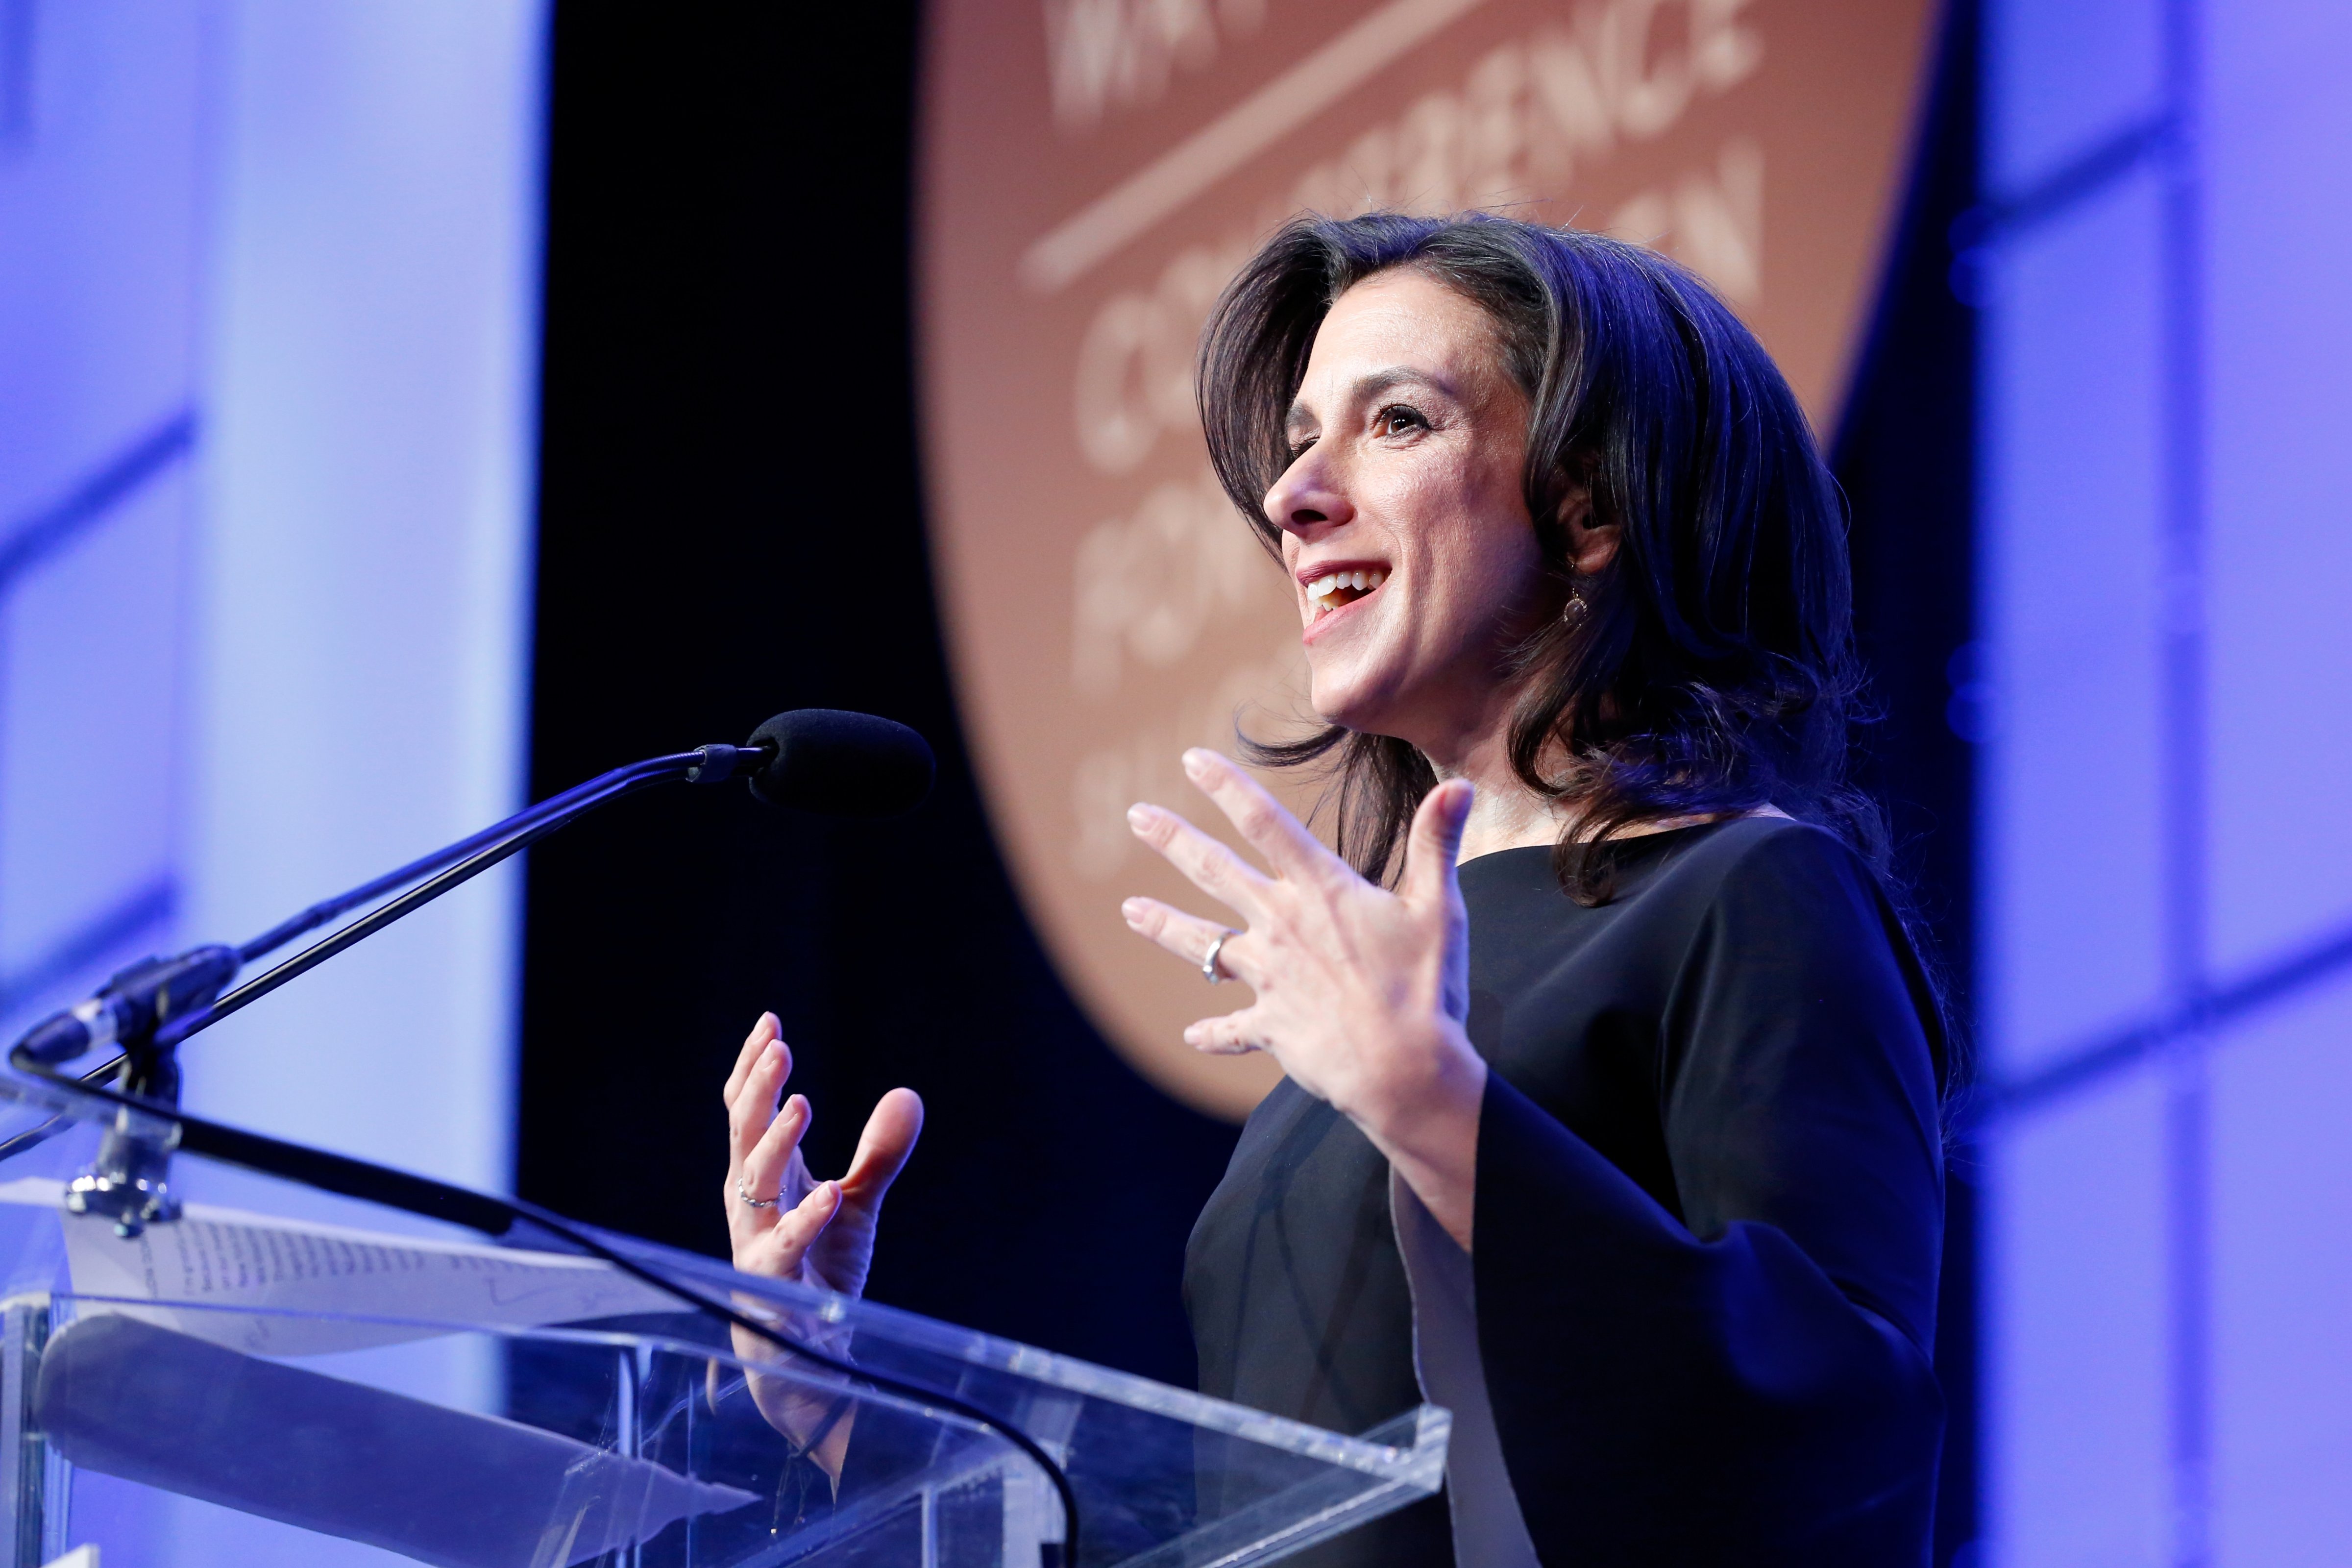 New York Times investigative reporter Jodi Kantor speaks onstage at the Watermark Conference for Women 2018 at San Jose Convention Center in San Jose, Calif., on Feb. 23, 2018. (Marla Aufmuth&mdash;Getty Images for Watermark Conference for Women 2018)